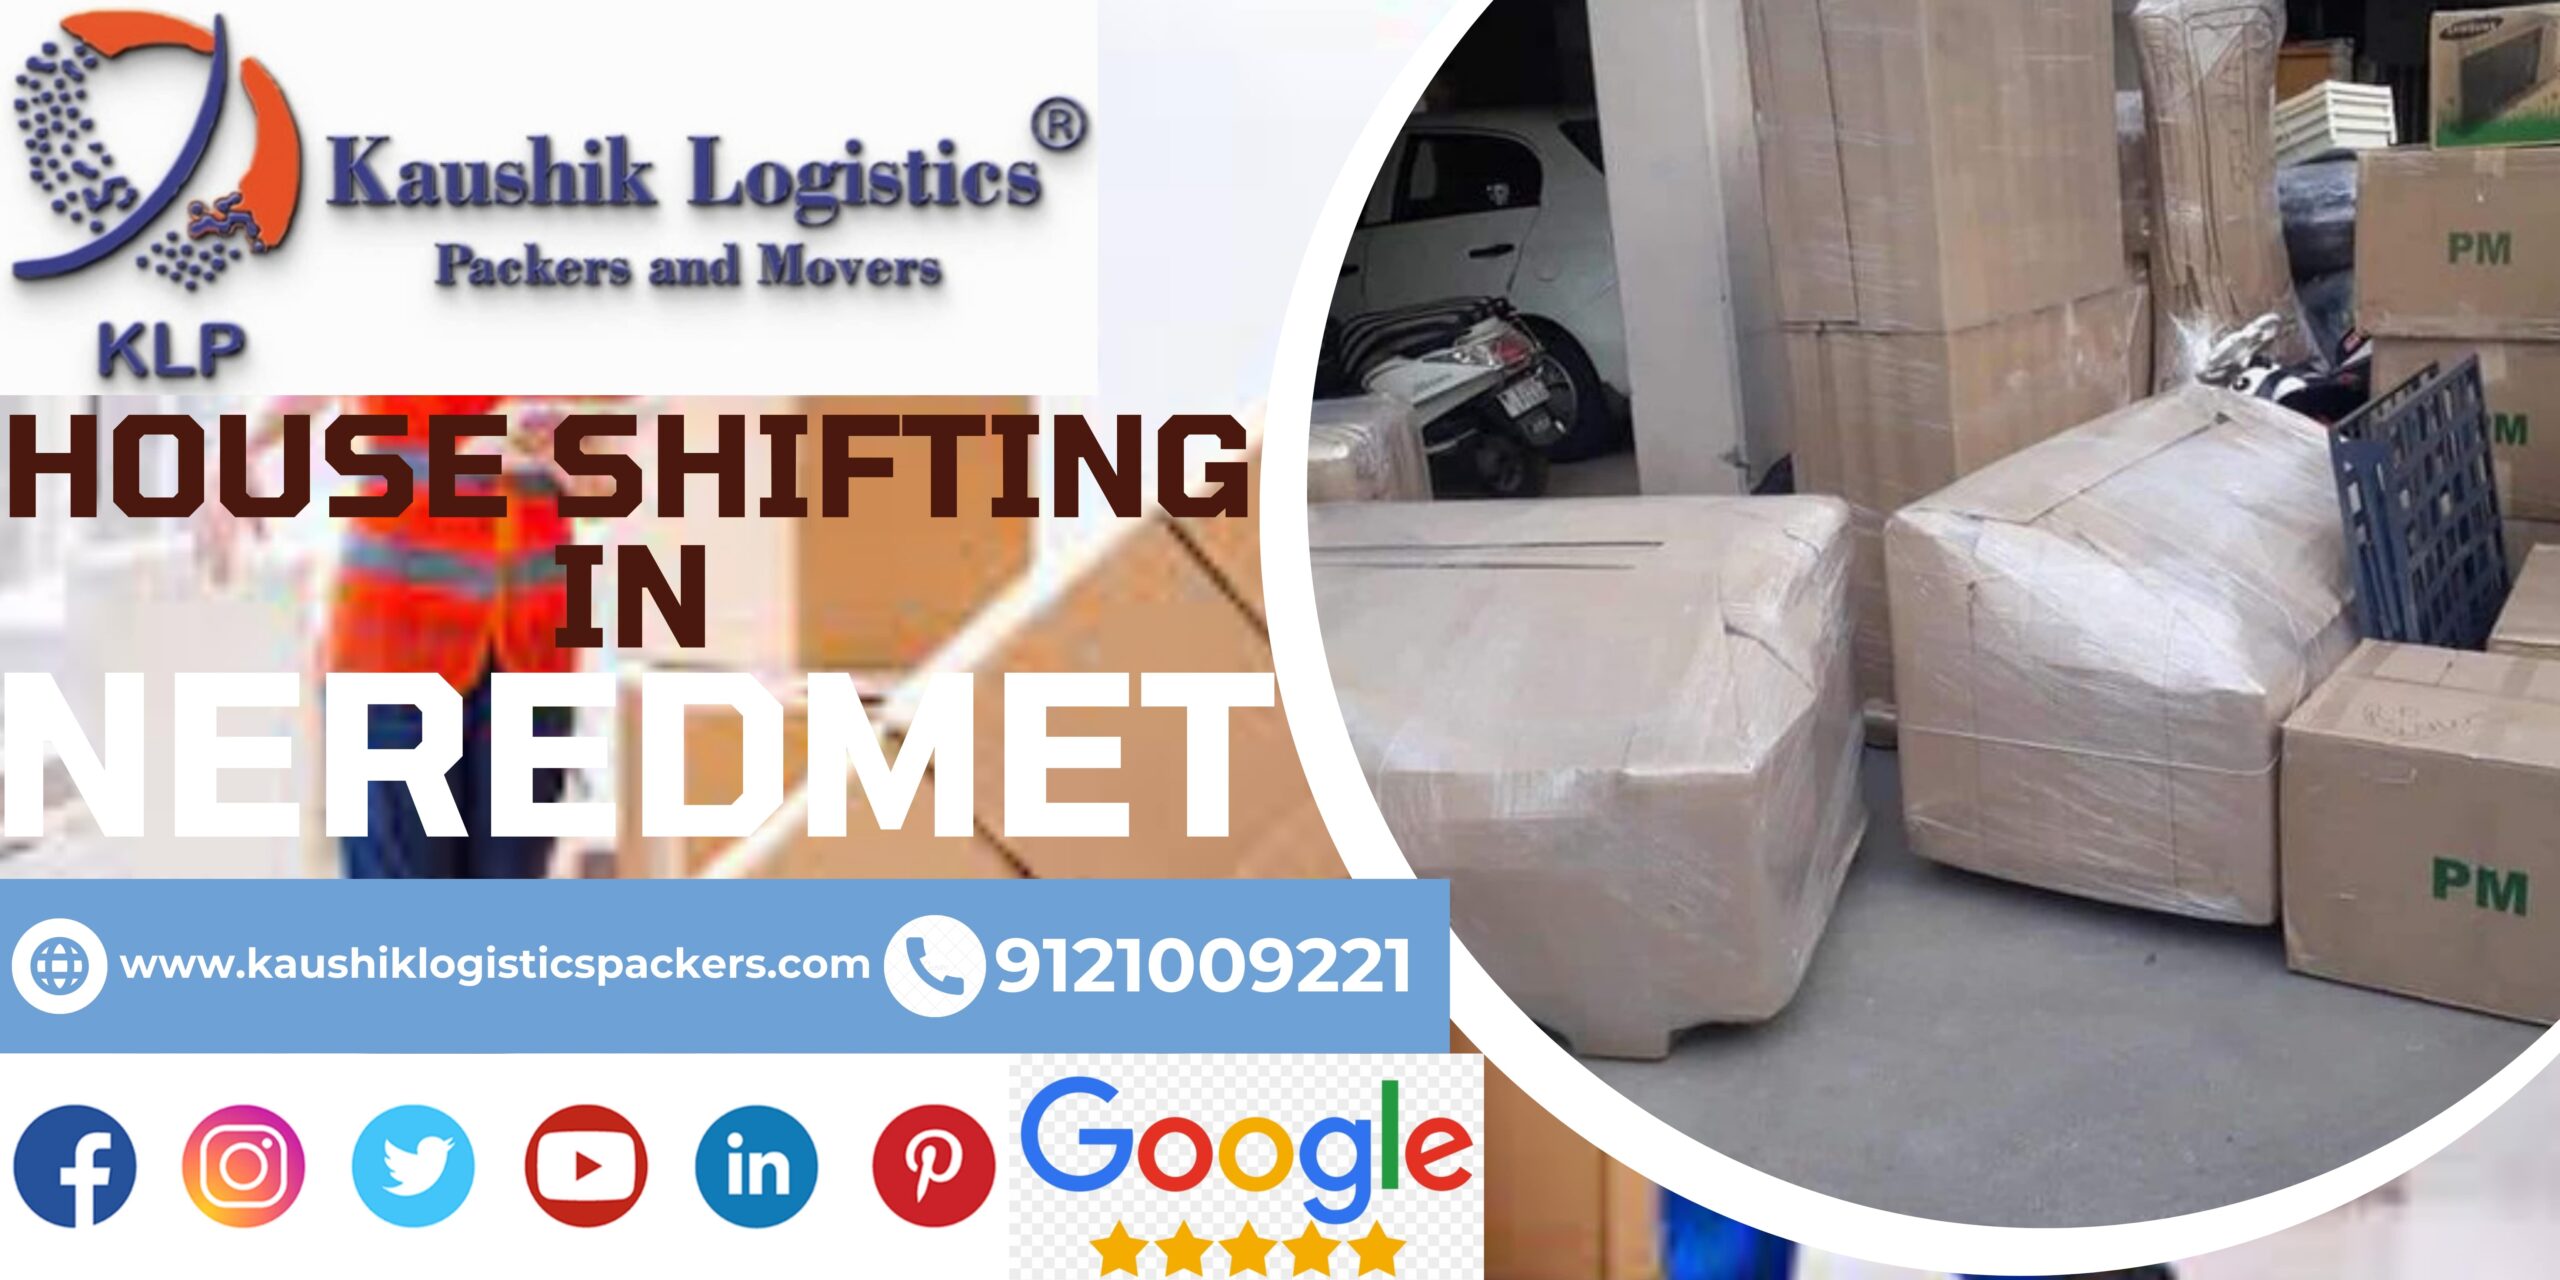 Packers and Movers In Neredmet